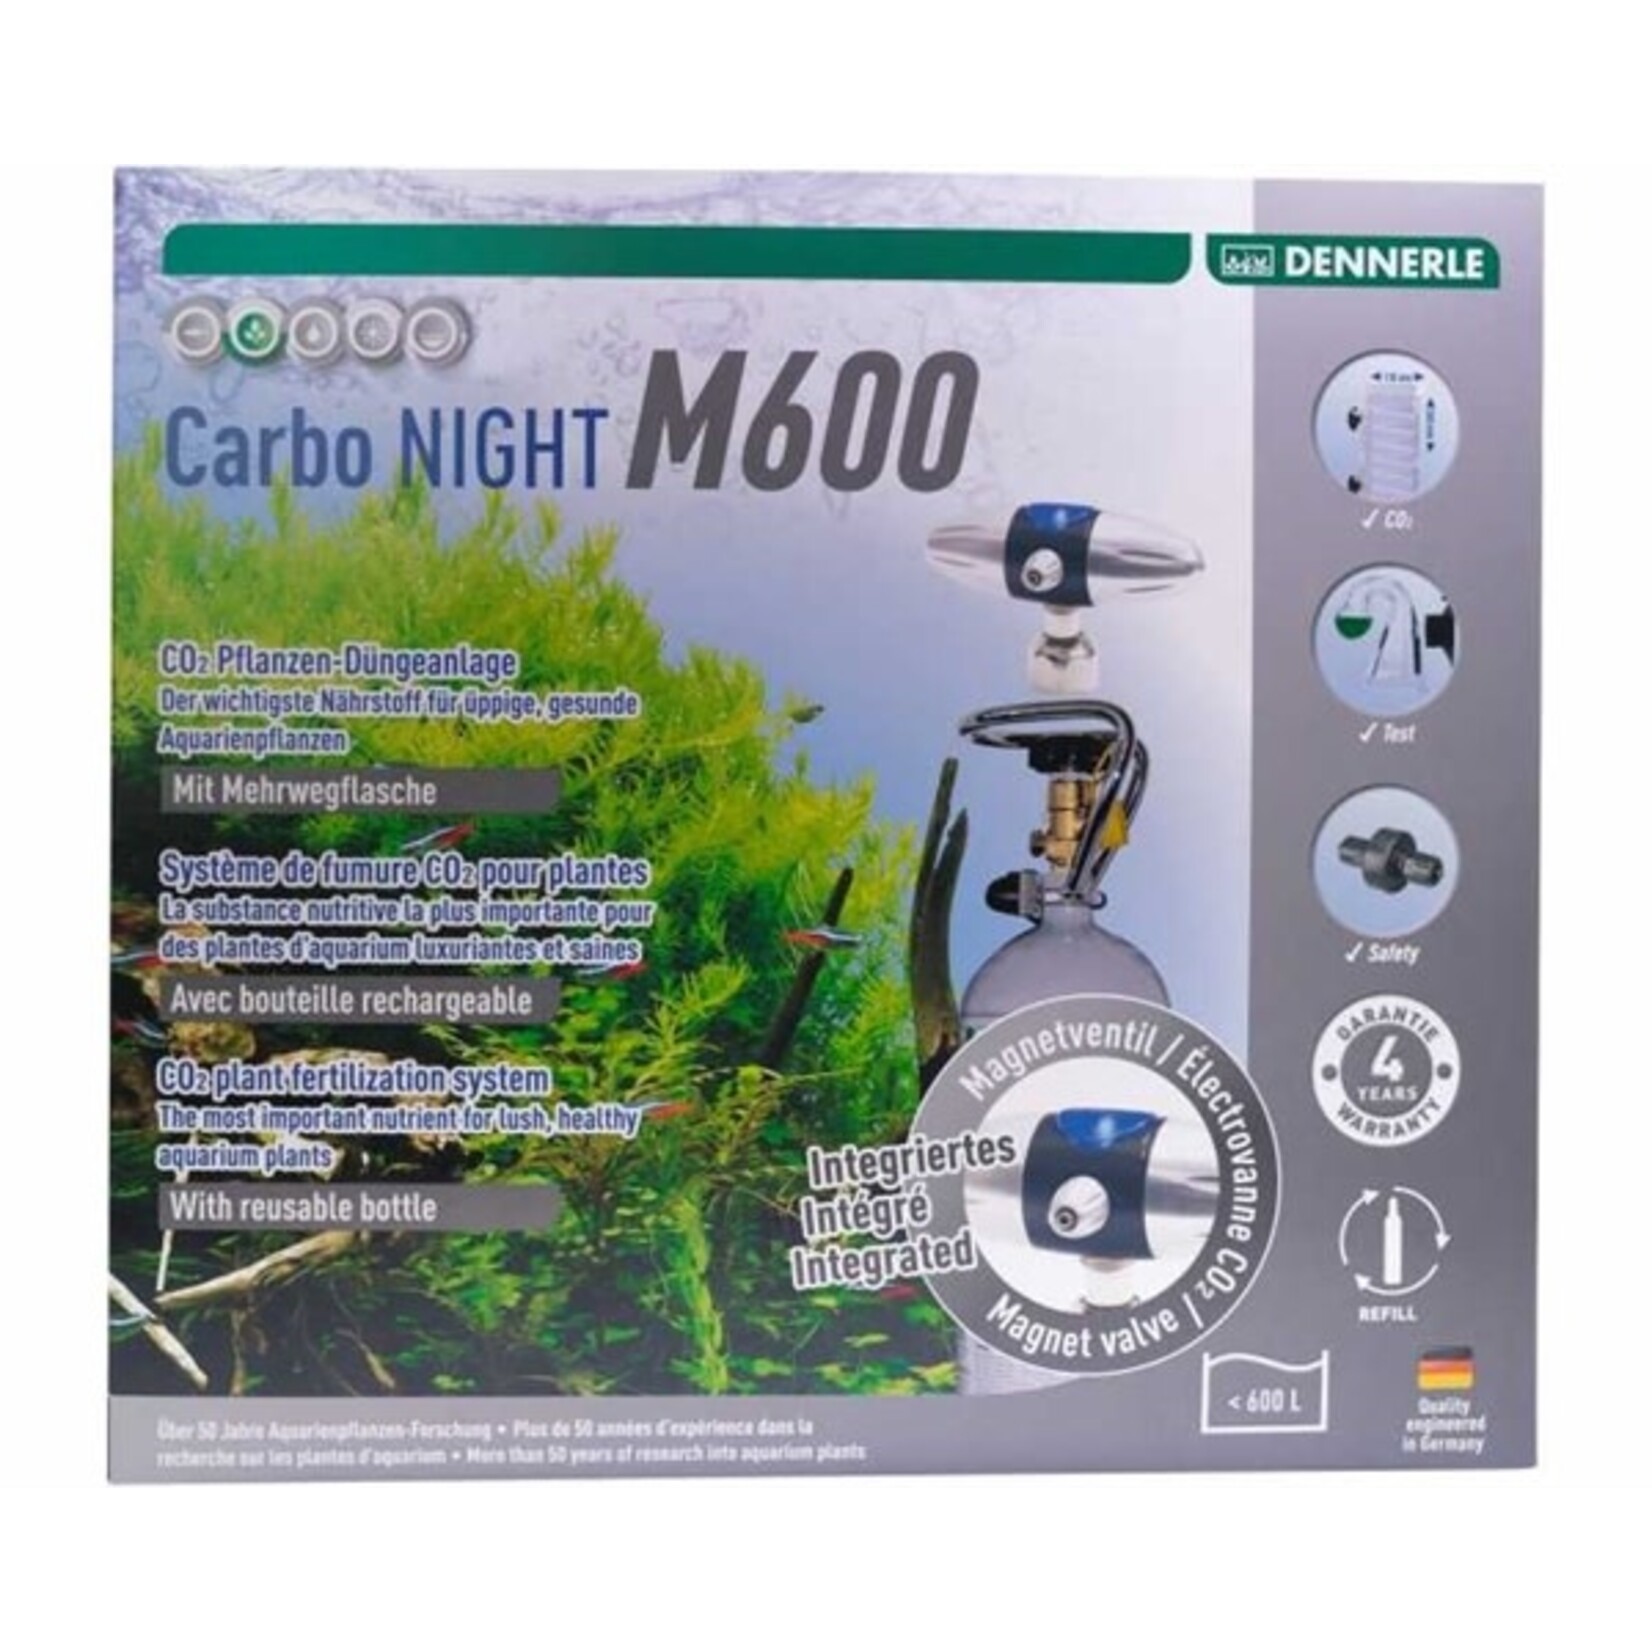 Dennerle co2 carbo night m600